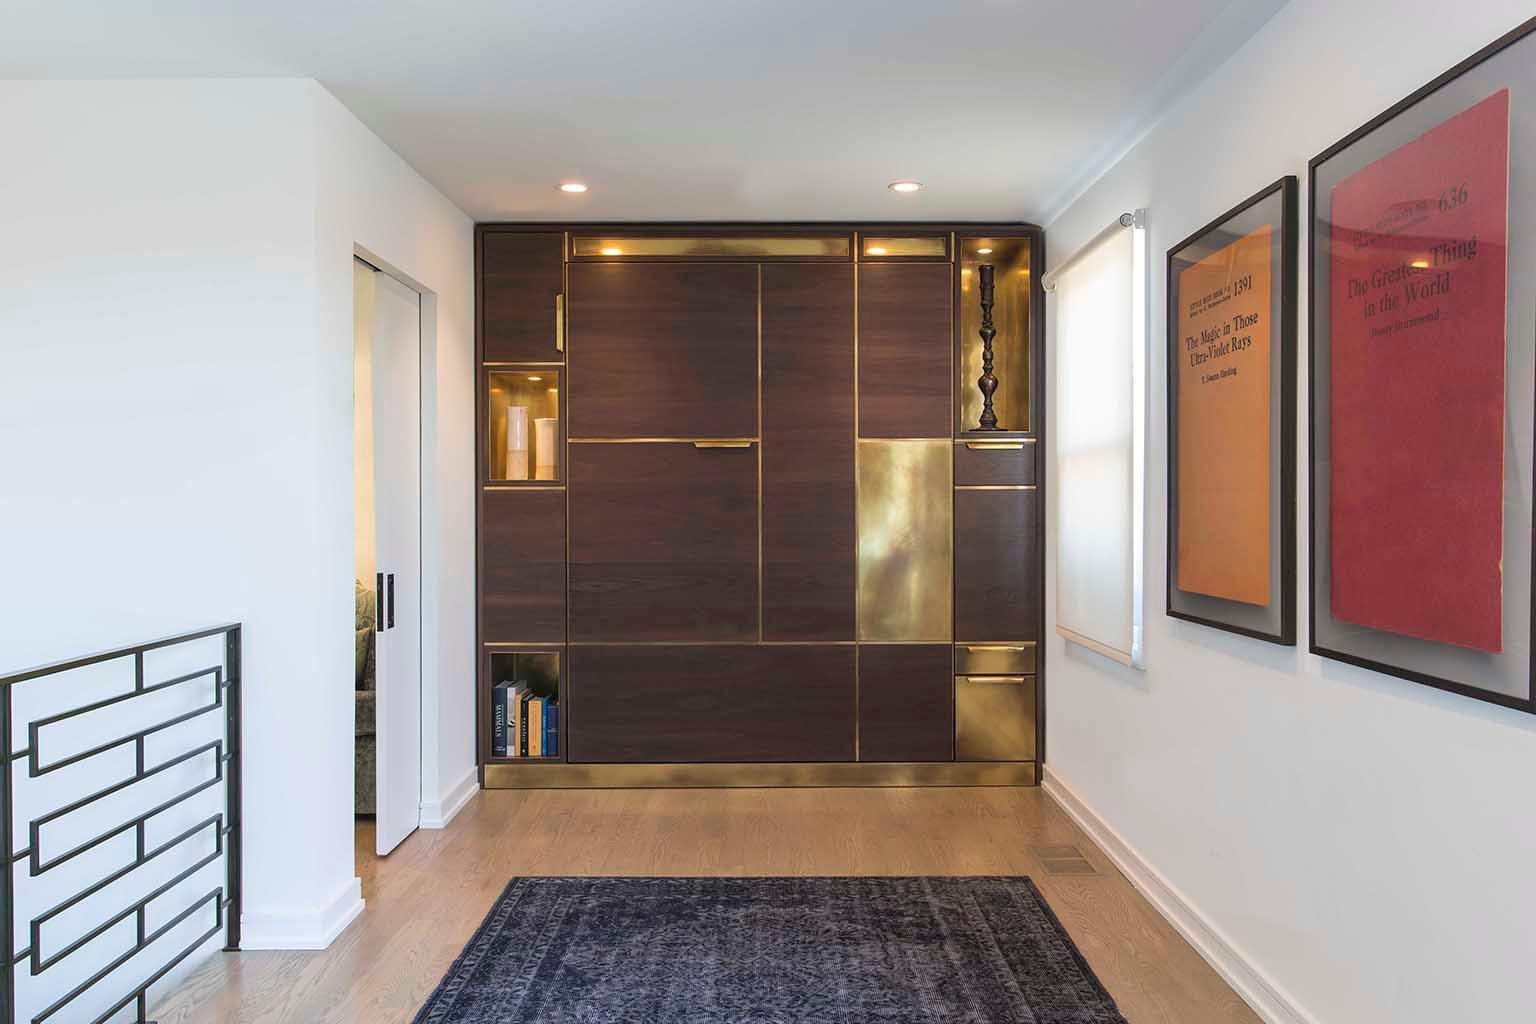 Designed to feel like a built-in piece of millwork Amuneal’s Murphy bed conceals a queen-sized mattress behind panels of silvered walnut with warm brass inlays. With the bed closed, the walnut and brass panels work with brass clad cubbies and